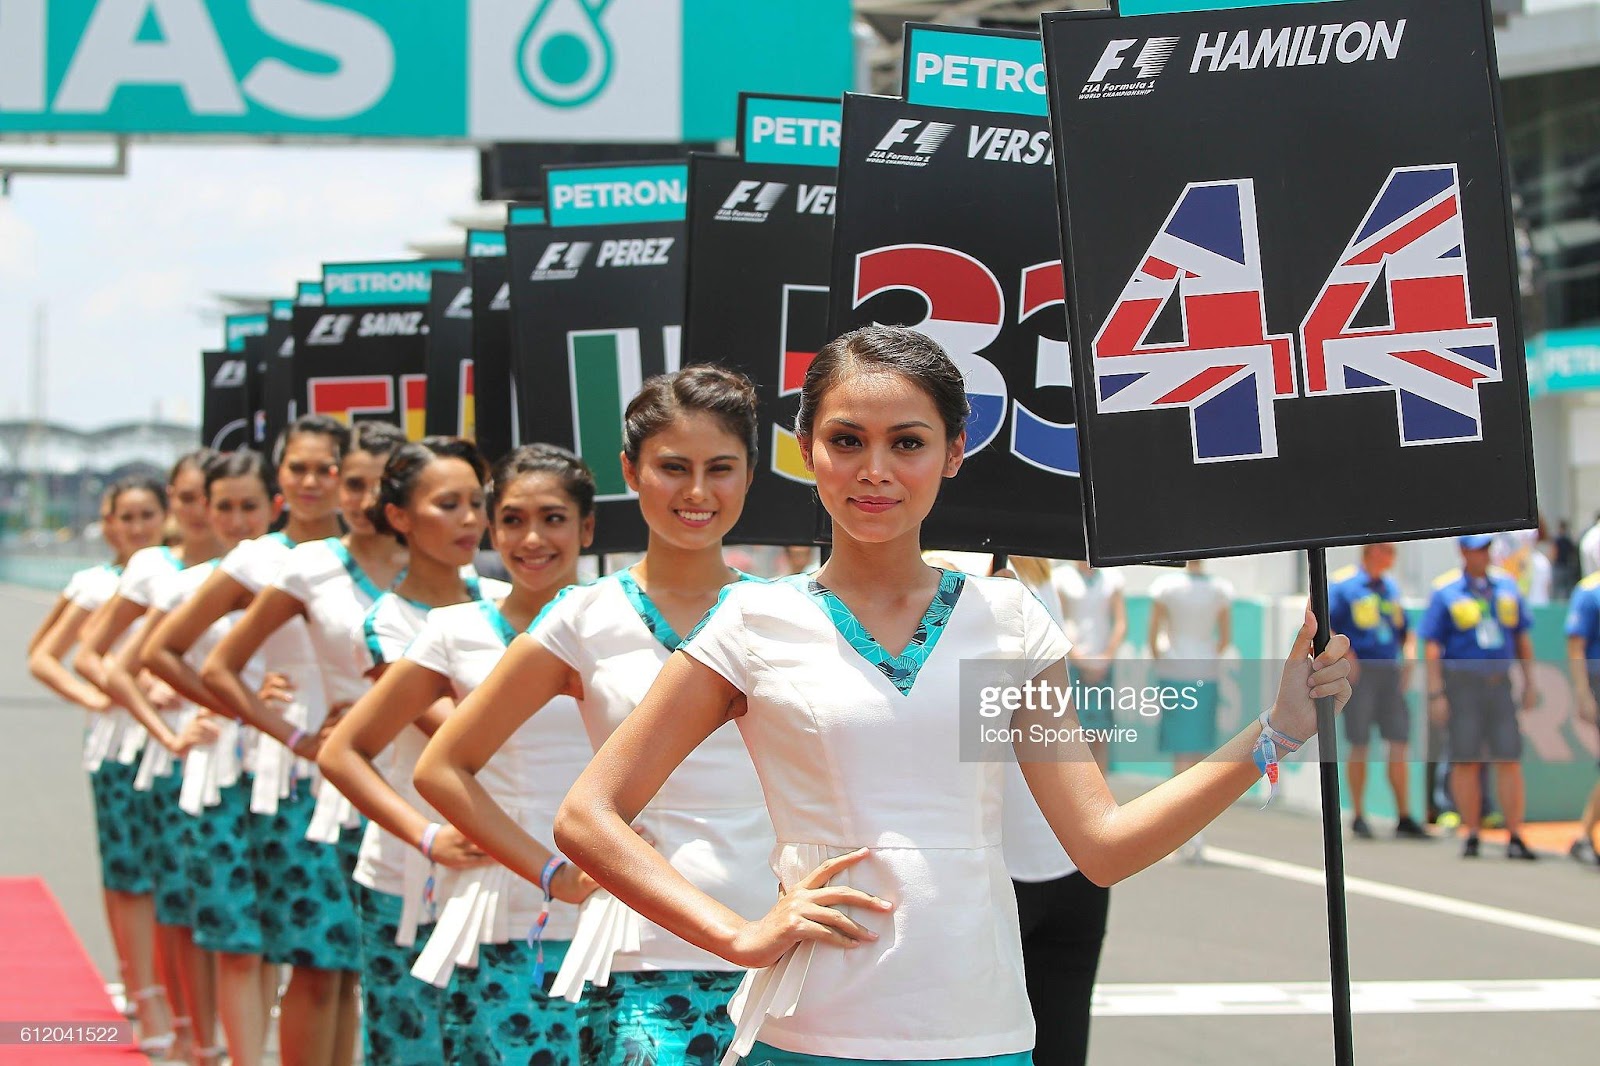 D:\Documenti\posts\posts\Women and motorsport\foto\Getty e altre\october-2016-grid-girls-pose-for-photograph-at-the-grid-before-the-picture-id612041522.jpg